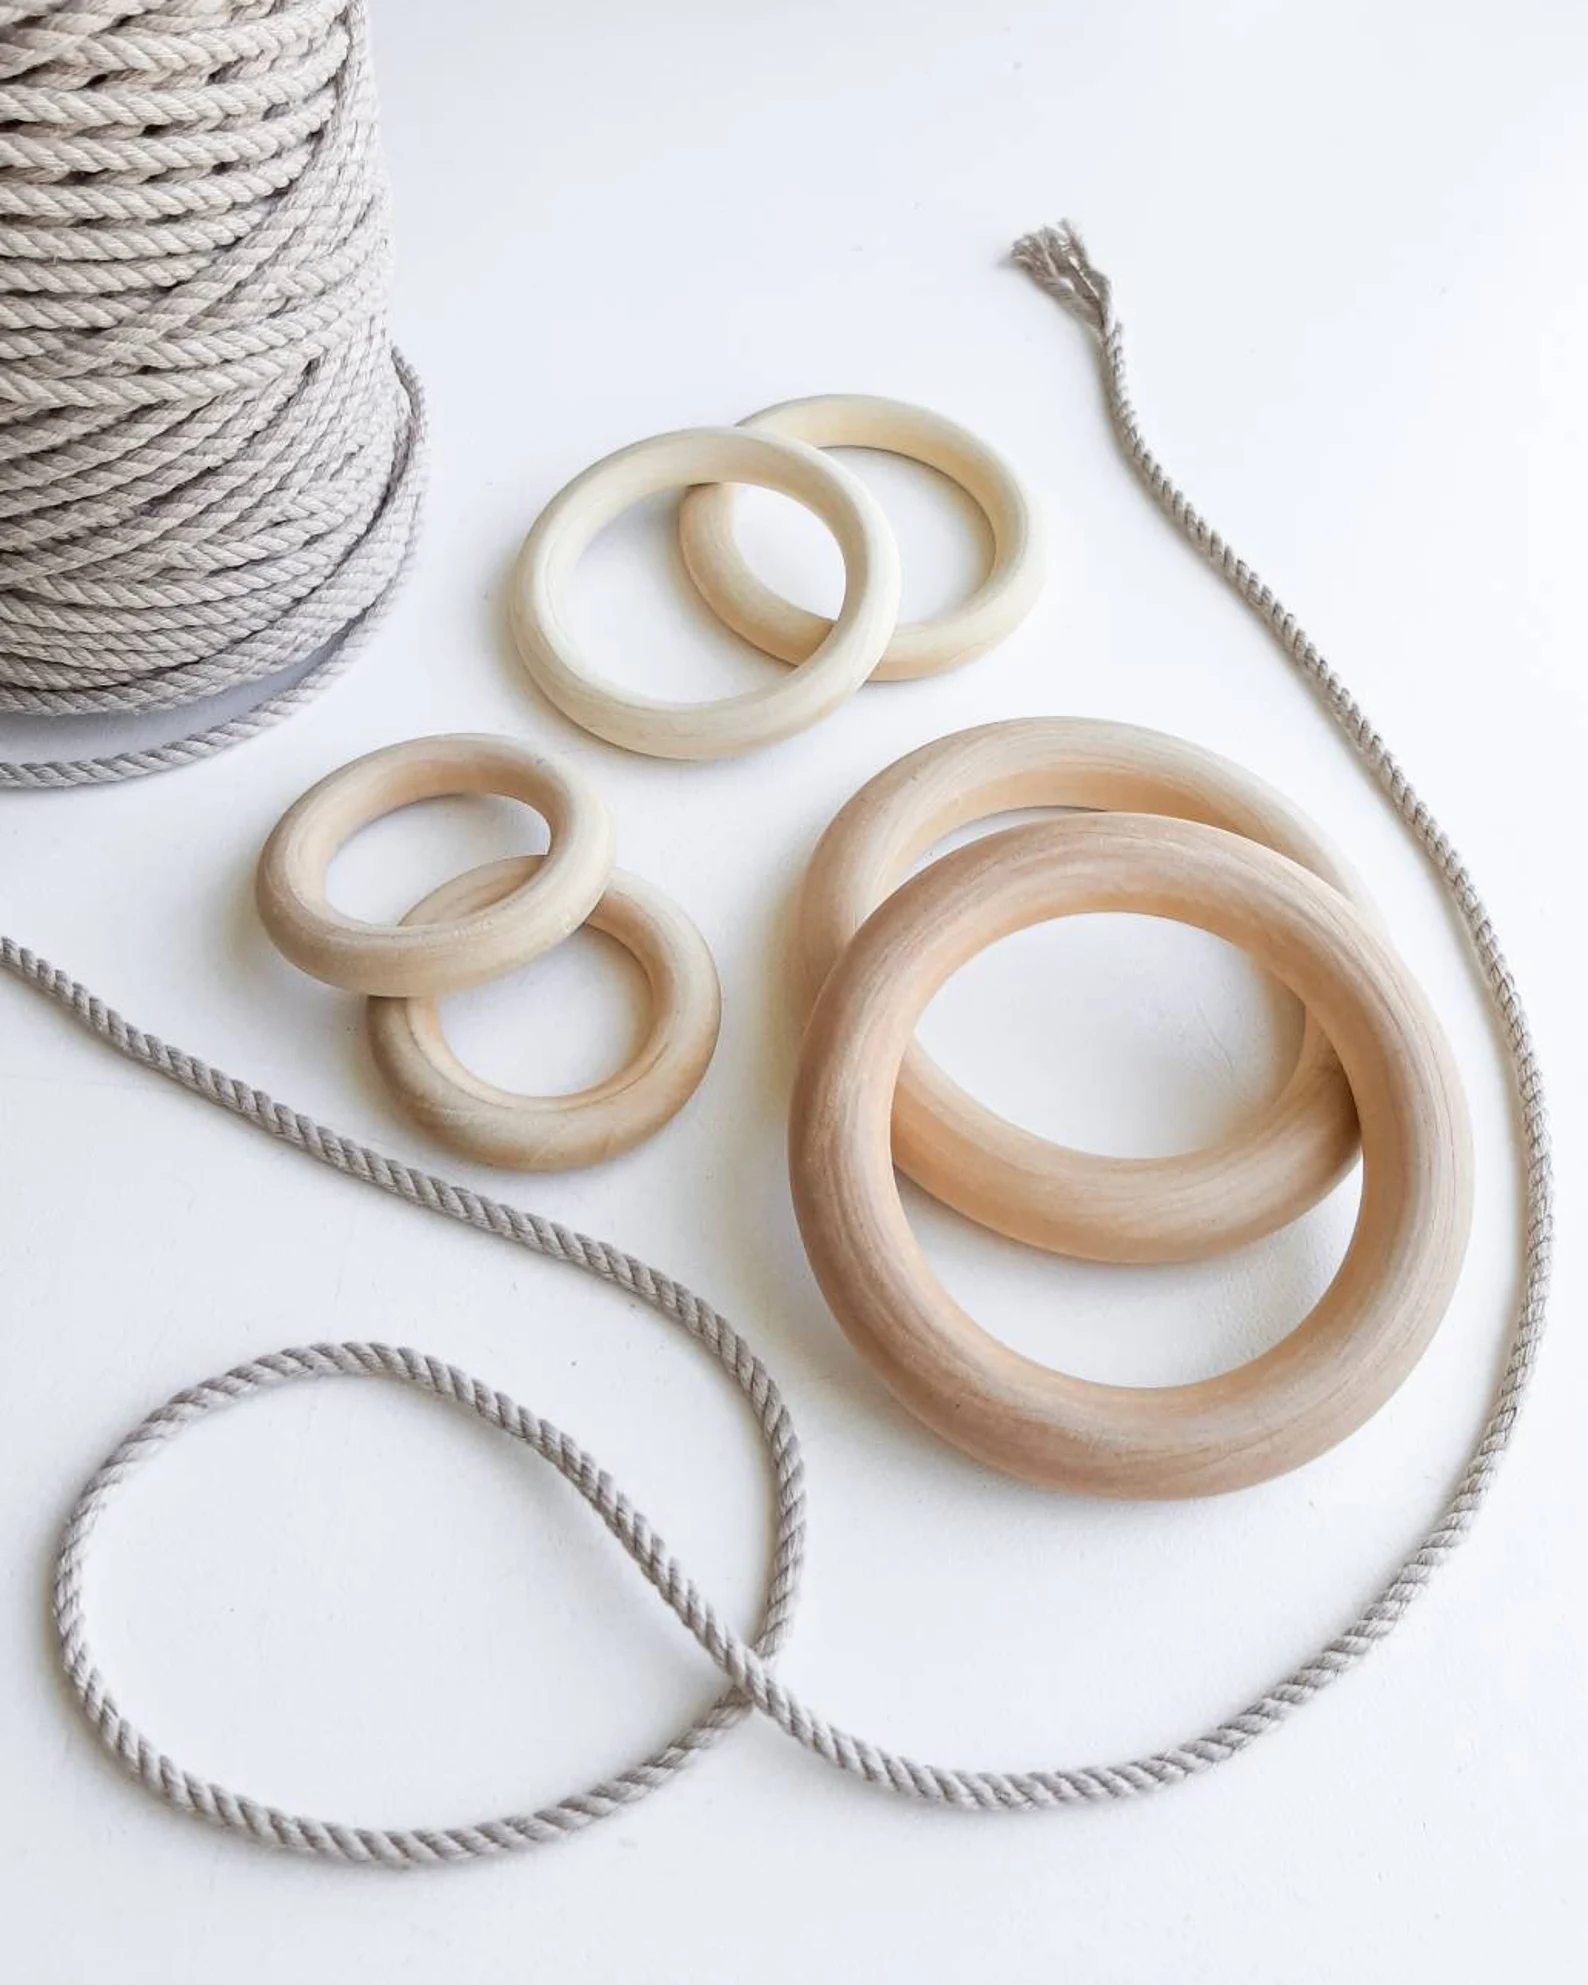 Macrame by JM - Wood Macrame rings/ 6 pieces, macrame supplies, 55mm, 70mm,  95mm, natural unfinished wood, plant hanger rings, macrame rings, wood